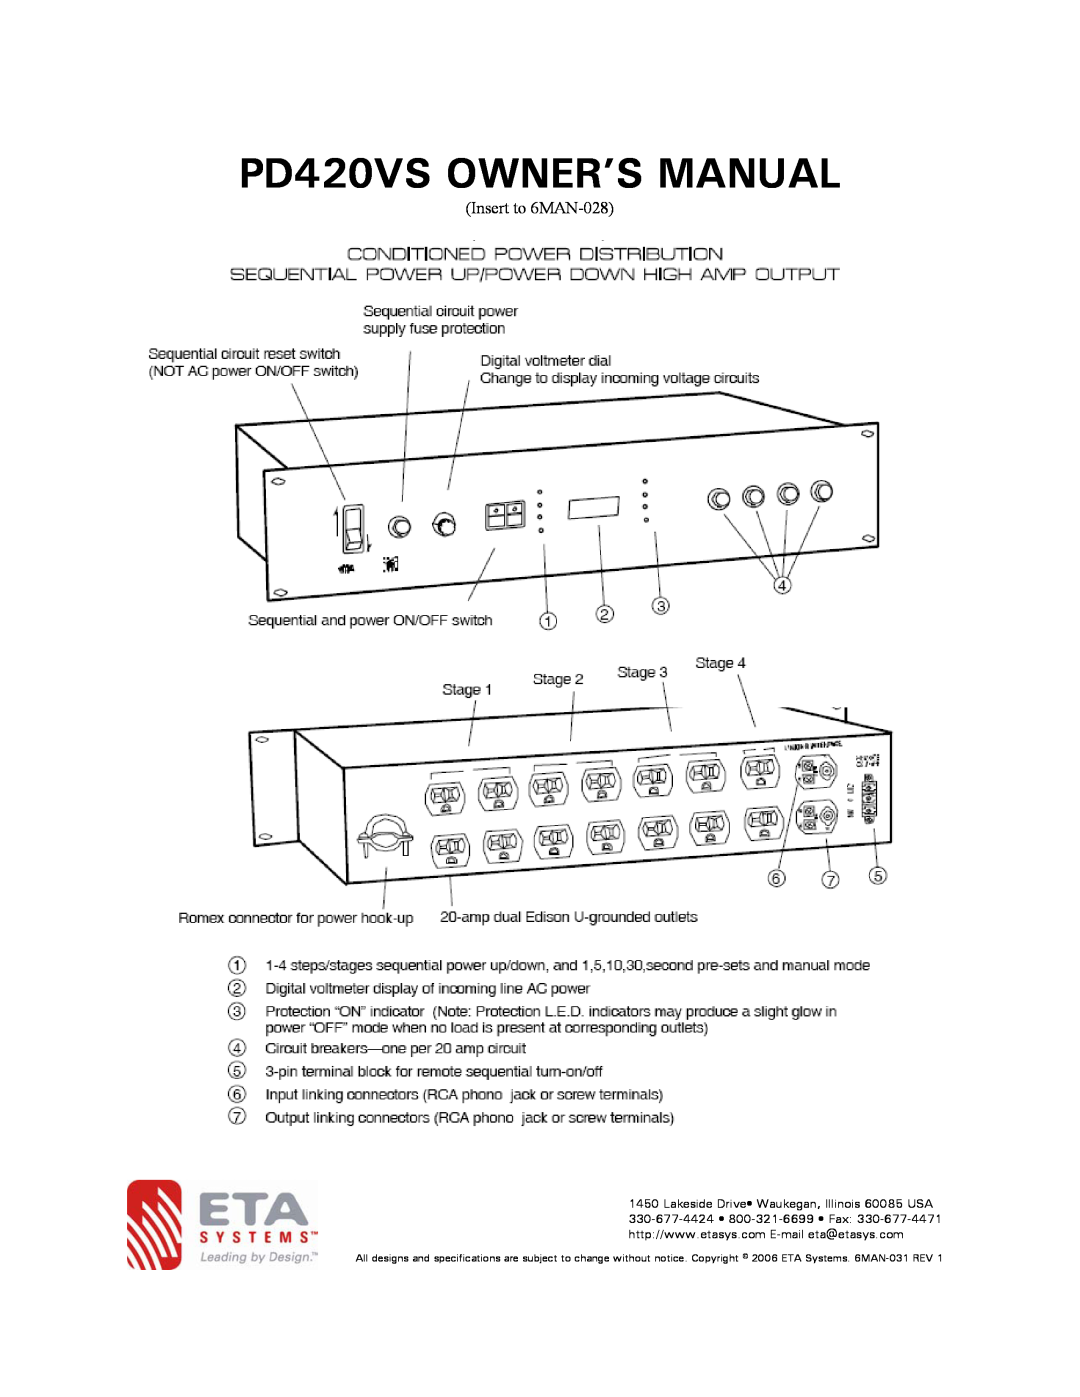 ETA Systems owner manual PD420VS OWNER’S MANUAL, Insert to 6MAN-028 